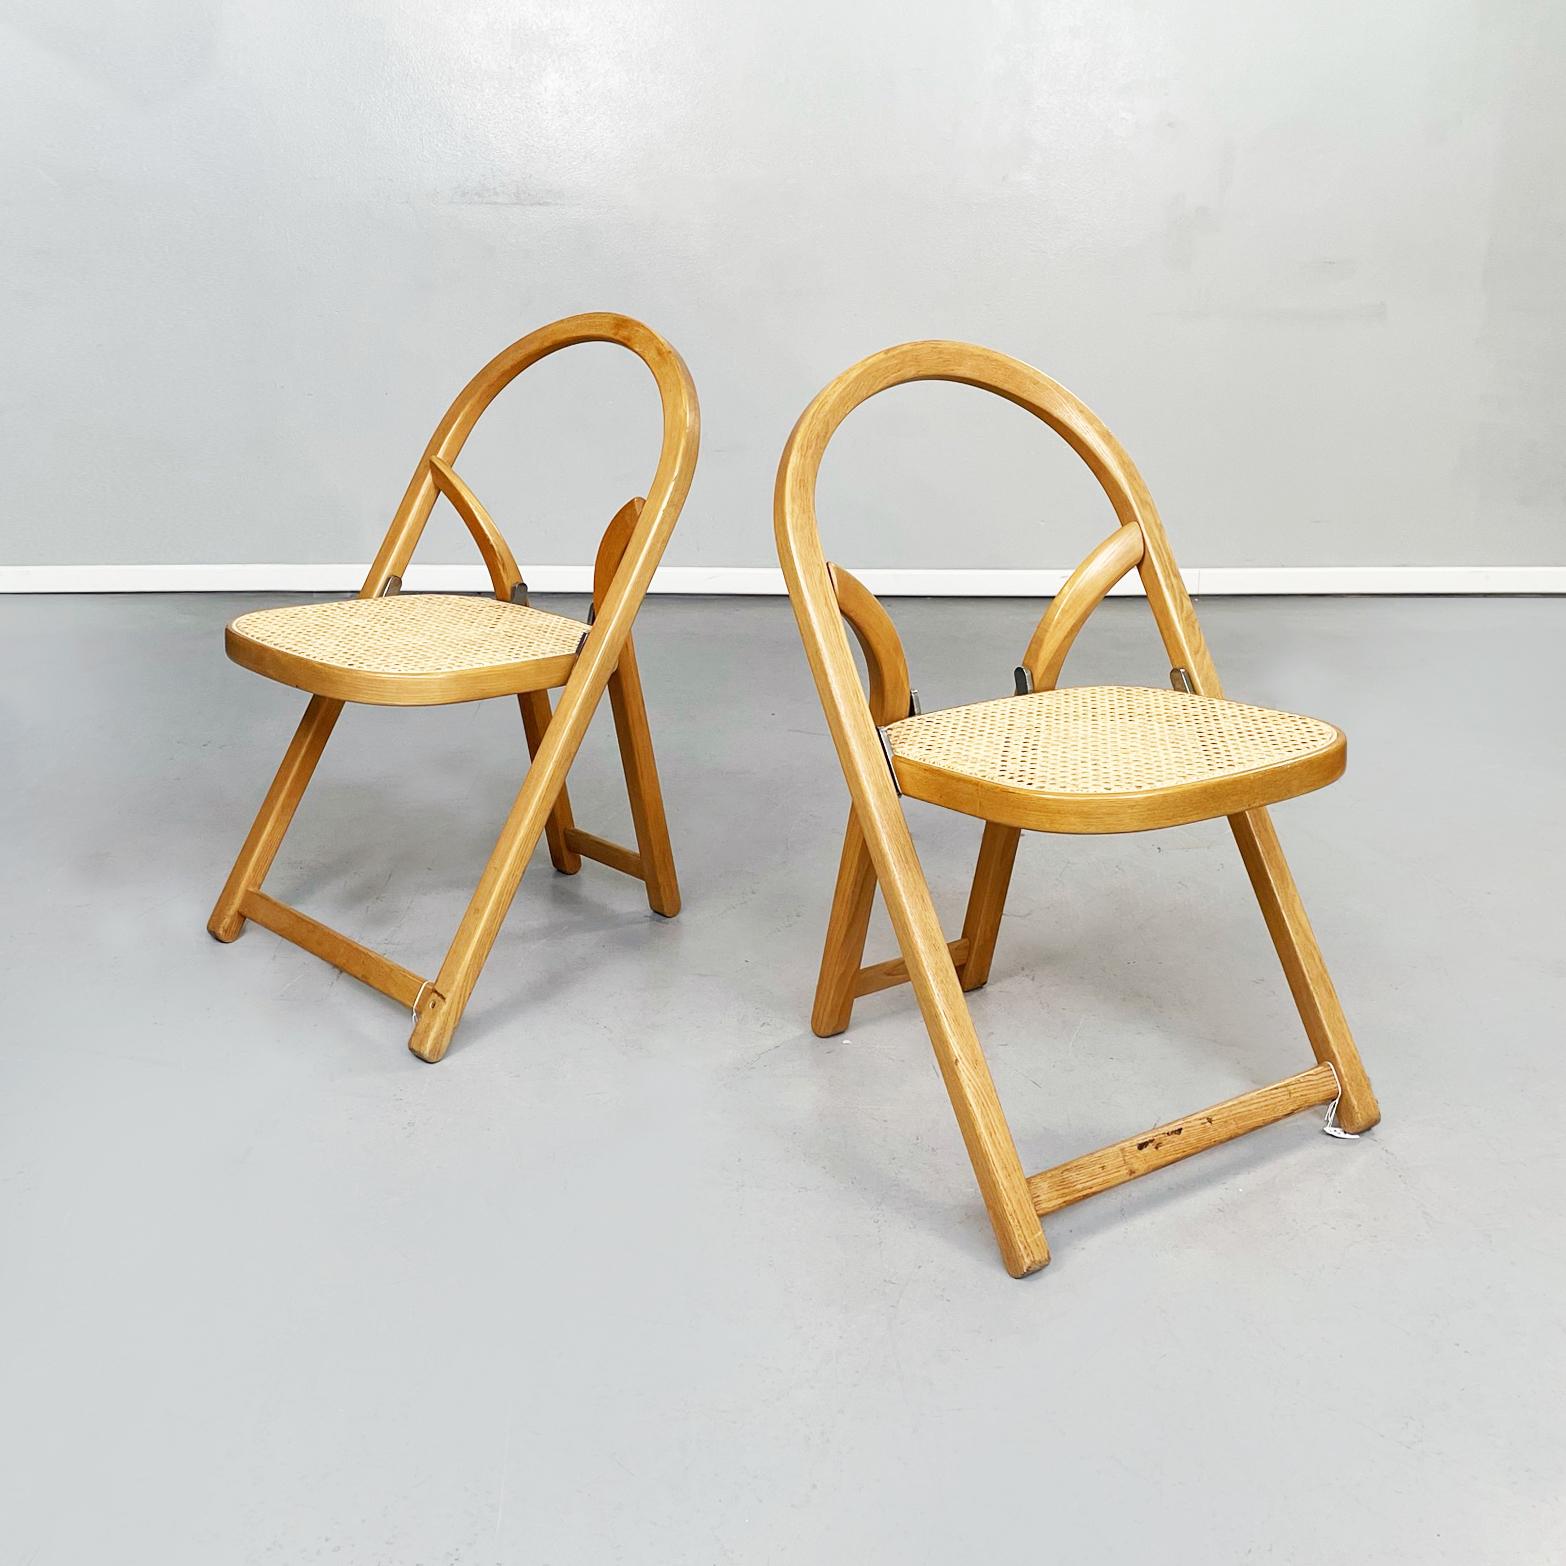 Italian mid-century Straw and wooden Arca chairs by Sabadin for Crassevig, 1970s
Set of 8 Arca model folding chairs with square seat with round corners in Vienna straw. The structure, which includes the semi-oval backrest and legs, is in light wood